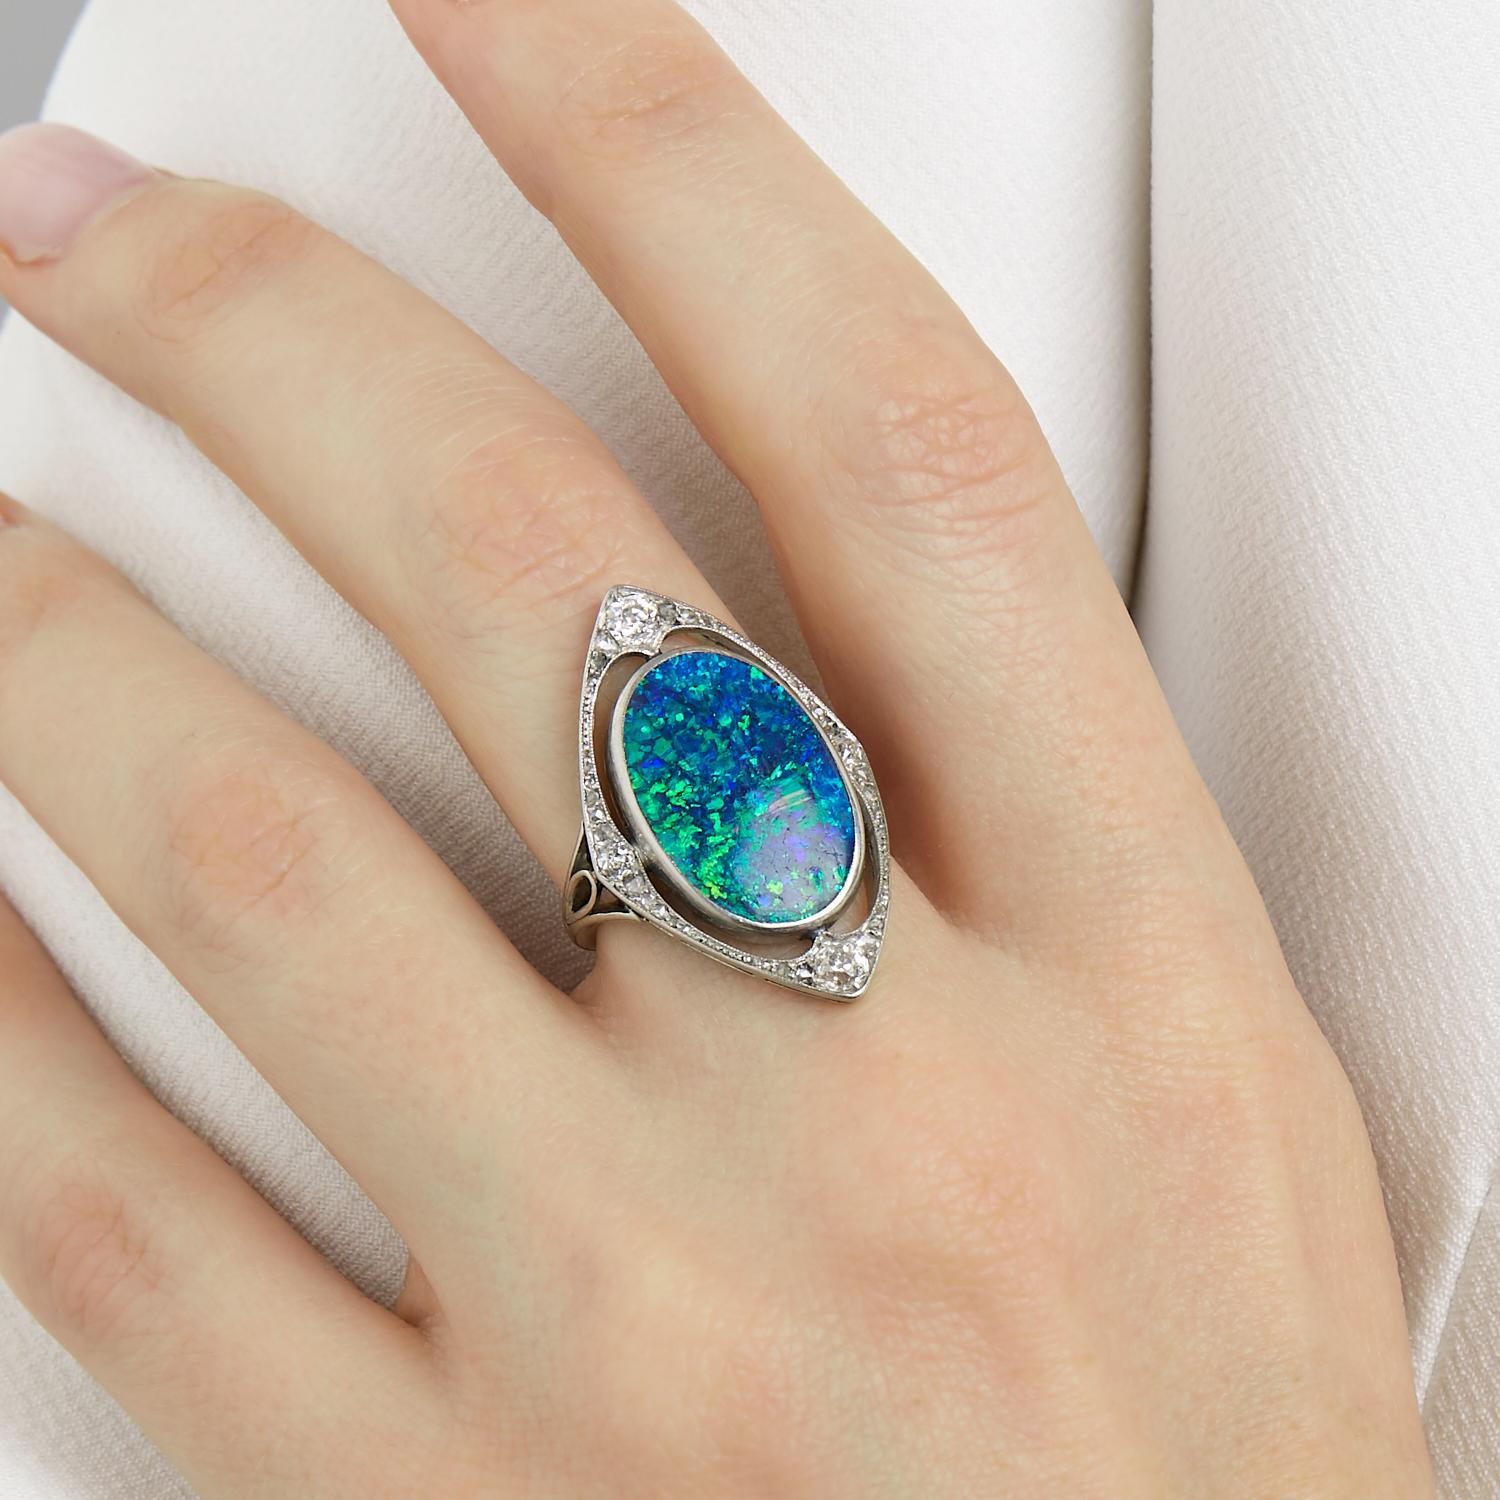 Oval black opal in a setting punctuated with small  old cut- diamonds.Platinum setting. 
Gross weight : 8,41 gr. 
Dimensions : 3 x 1,9 cm. 
Finger size : 6 1/4
French , ca. 1910
(opal approximately 6 cts)
